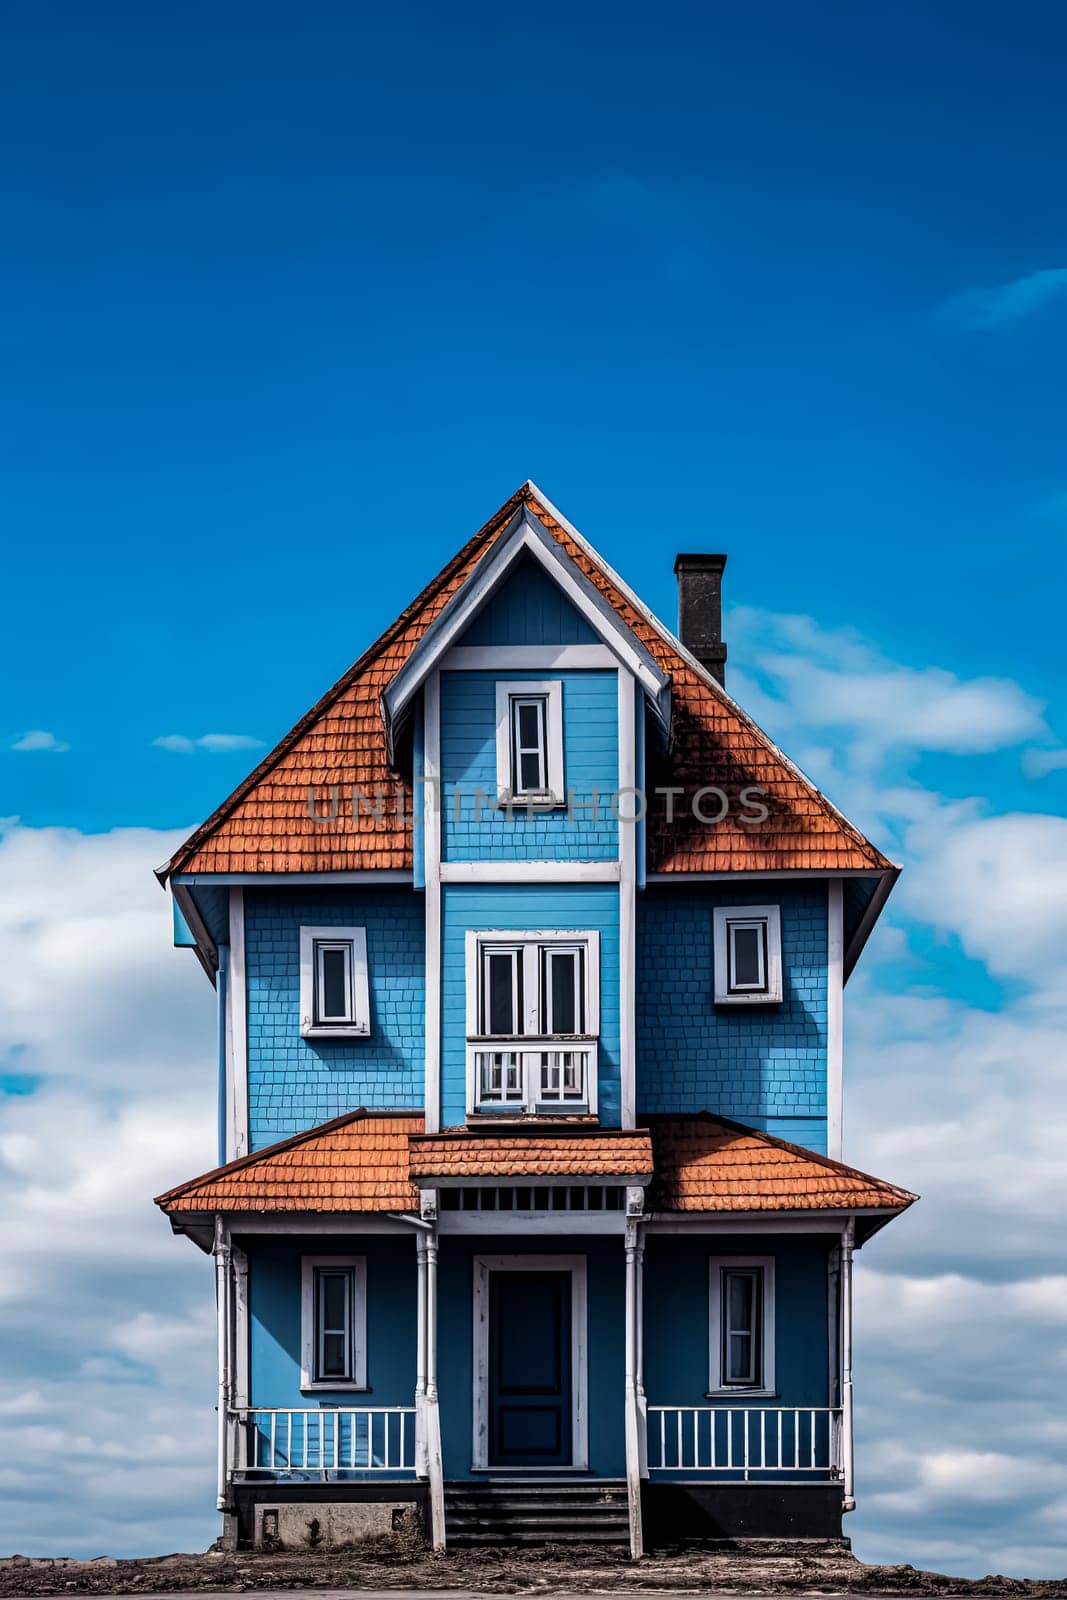 A blue house with a red roof and white trim. The house is small and has a porch. The sky is blue and there are clouds in the background